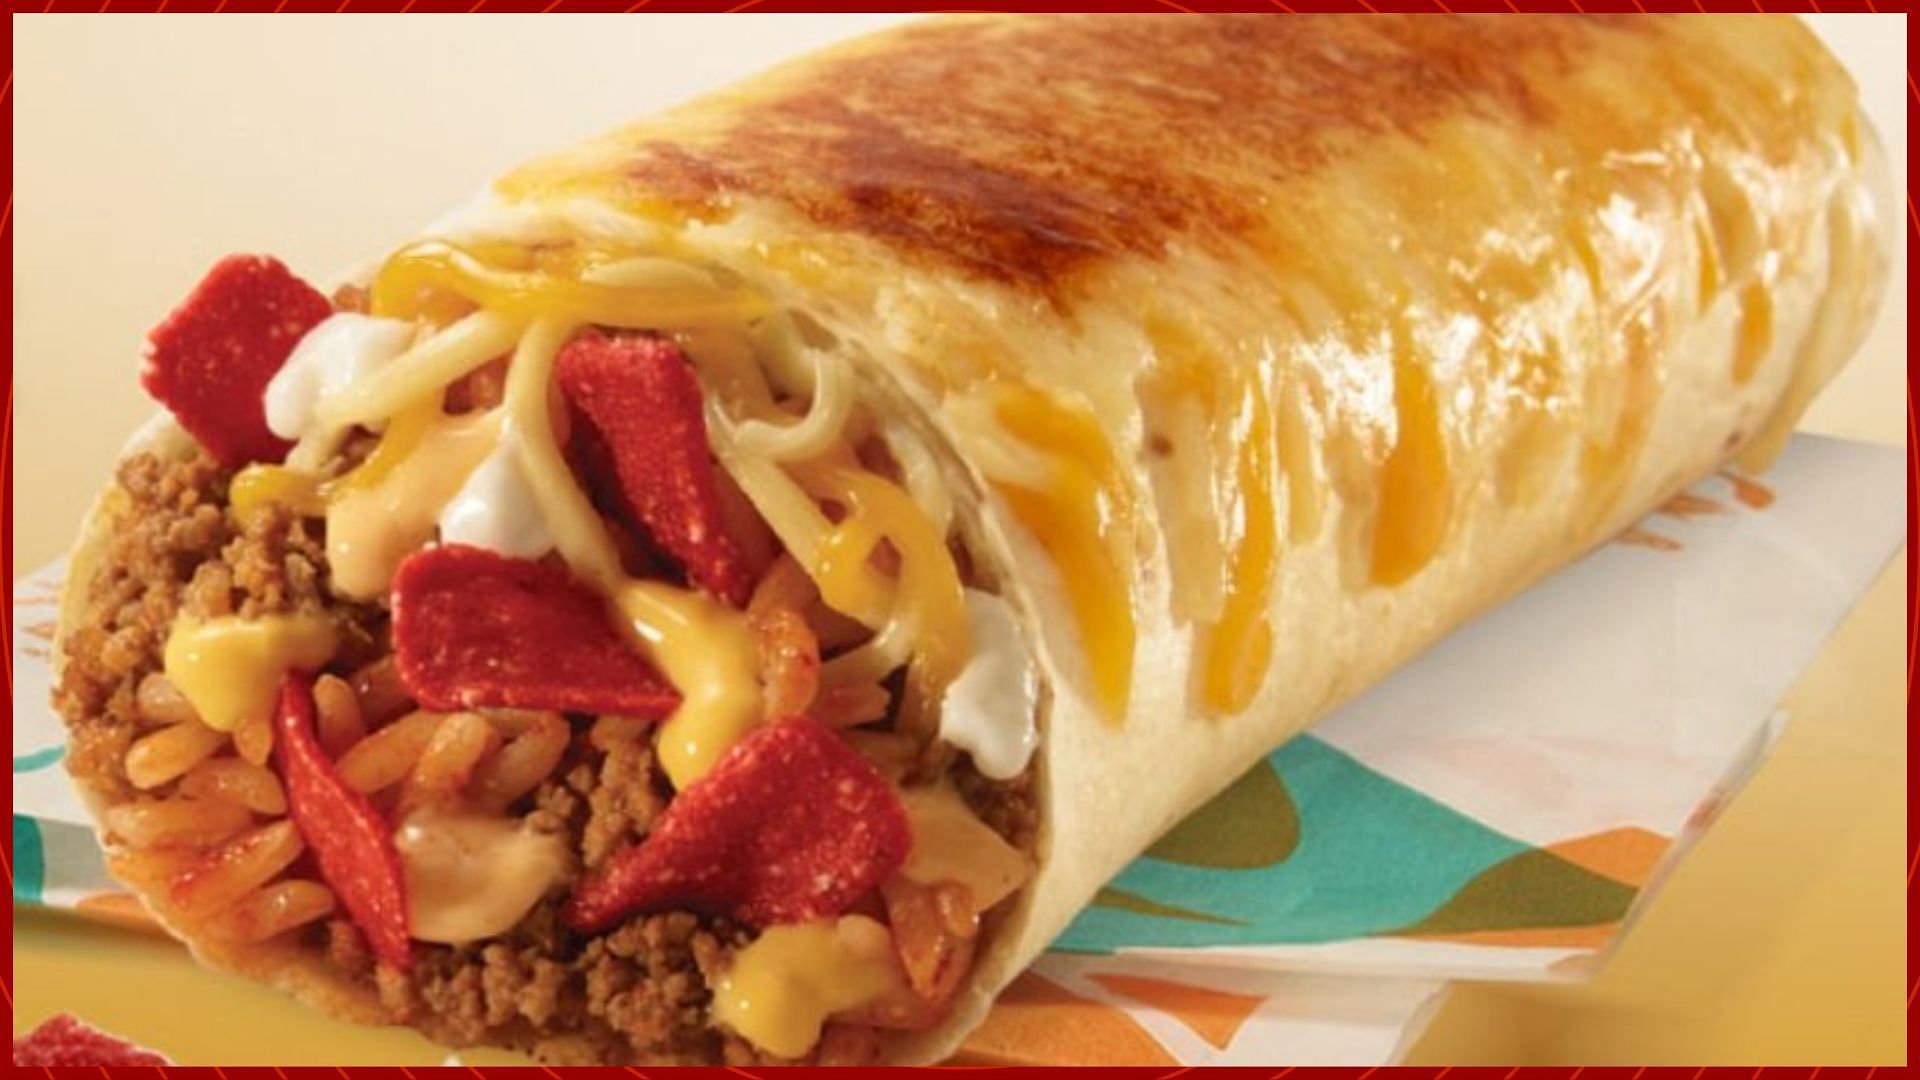 Taco Bell Grilled Cheese Burrito Varieties, price, ingredients, and